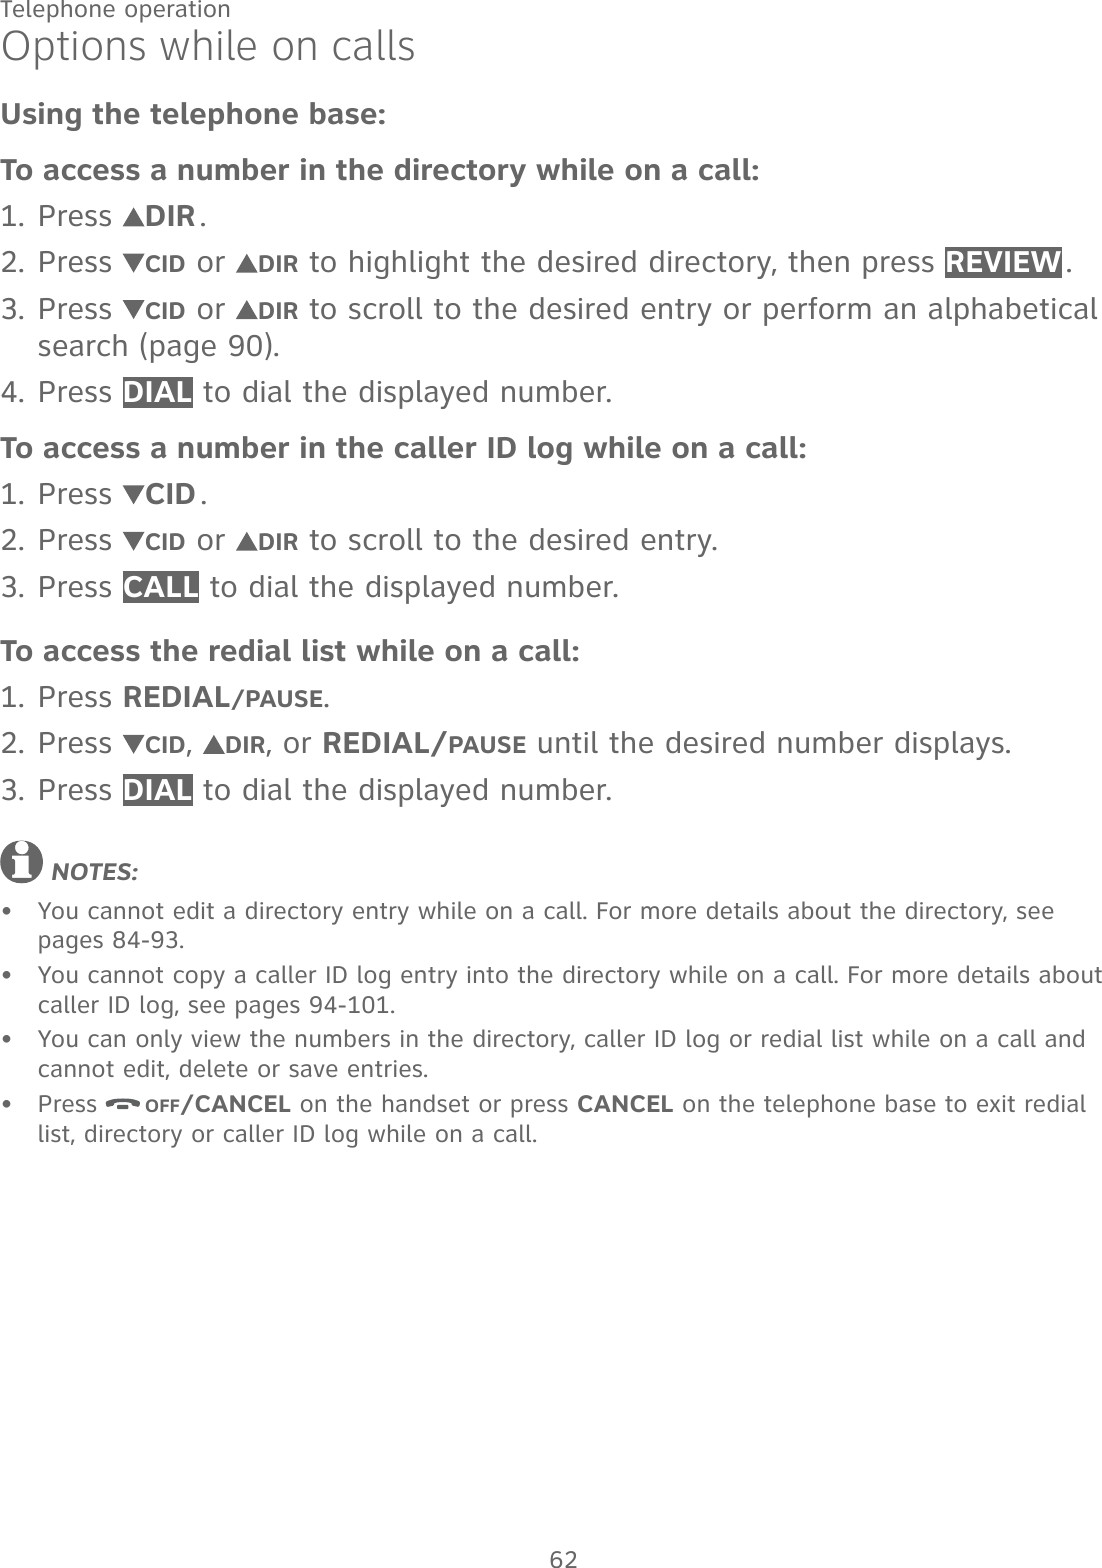 62Telephone operationOptions while on callsUsing the telephone base:To access a number in the directory while on a call:Press  DIR .Press  CID or  DIR to highlight the desired directory, then press REVIEW . Press  CID or  DIR to scroll to the desired entry or perform an alphabetical search (page 90).Press DIAL to dial the displayed number.To access a number in the caller ID log while on a call:Press  CID .Press  CID or  DIR to scroll to the desired entry.Press CALL to dial the displayed number.To access the redial list while on a call:Press REDIAL/PAUSE.Press  CID,  DIR, or REDIAL/PAUSE until the desired number displays.Press DIAL to dial the displayed number. NOTES: You cannot edit a directory entry while on a call. For more details about the directory, see  pages 84-93.You cannot copy a caller ID log entry into the directory while on a call. For more details about caller ID log, see pages 94-101.You can only view the numbers in the directory, caller ID log or redial list while on a call and cannot edit, delete or save entries.Press  OFF/CANCEL on the handset or press CANCEL on the telephone base to exit redial list, directory or caller ID log while on a call.1.2.3.4.1.2.3.1.2.3.••••